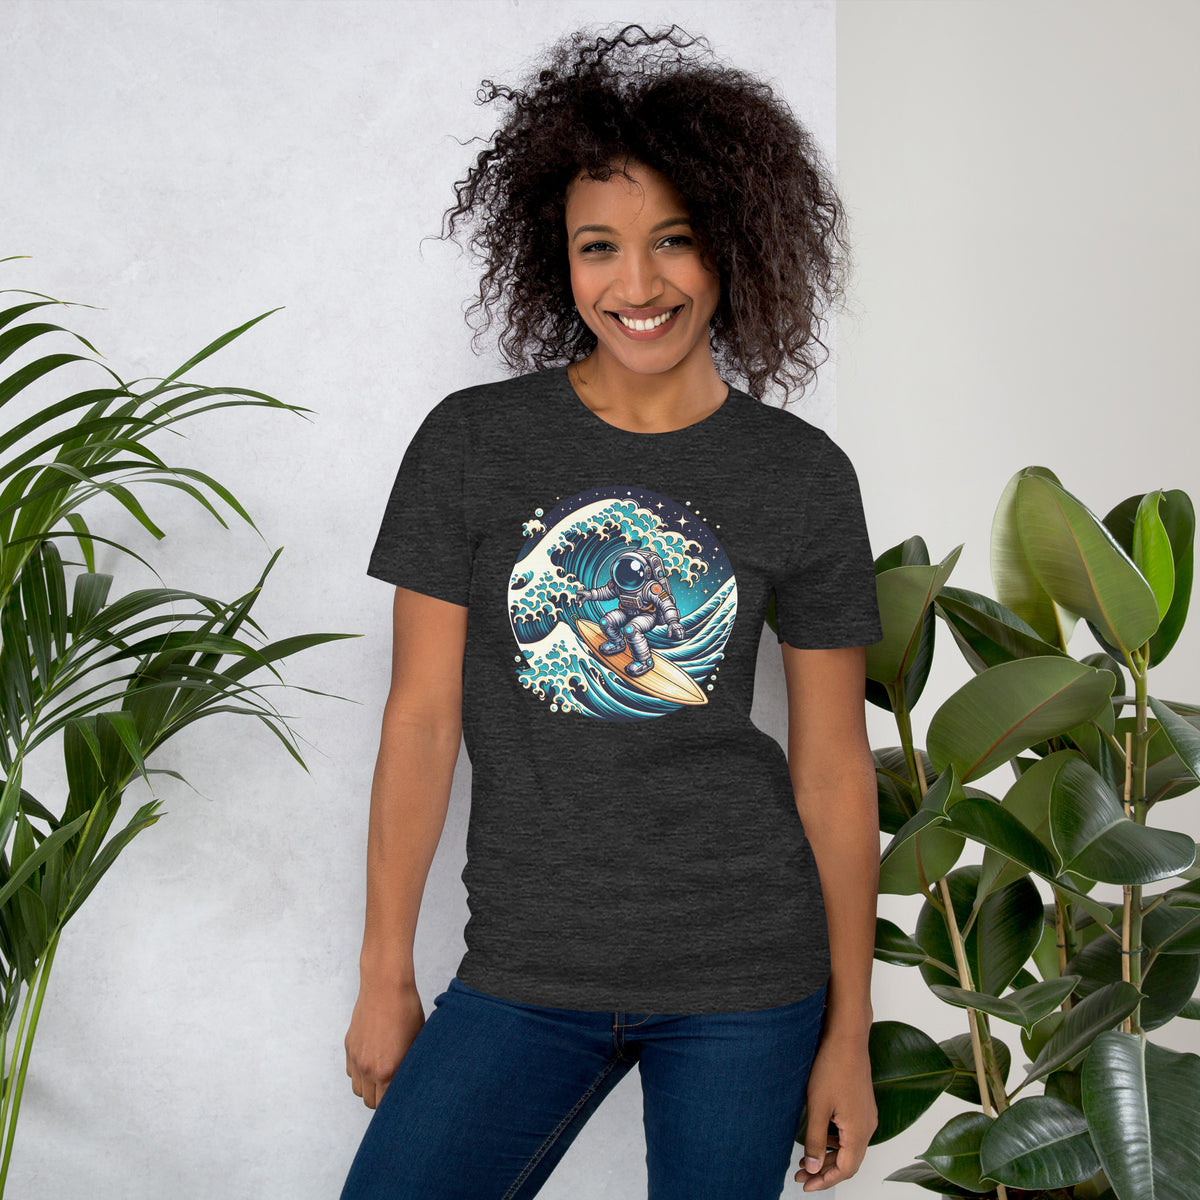 Space Astronaut Surfing Shirt, The Great Wave Kanagawa Tee, Ukiyo-e Inspired Outer Space Surfer Top, Funny Science Geek Gift